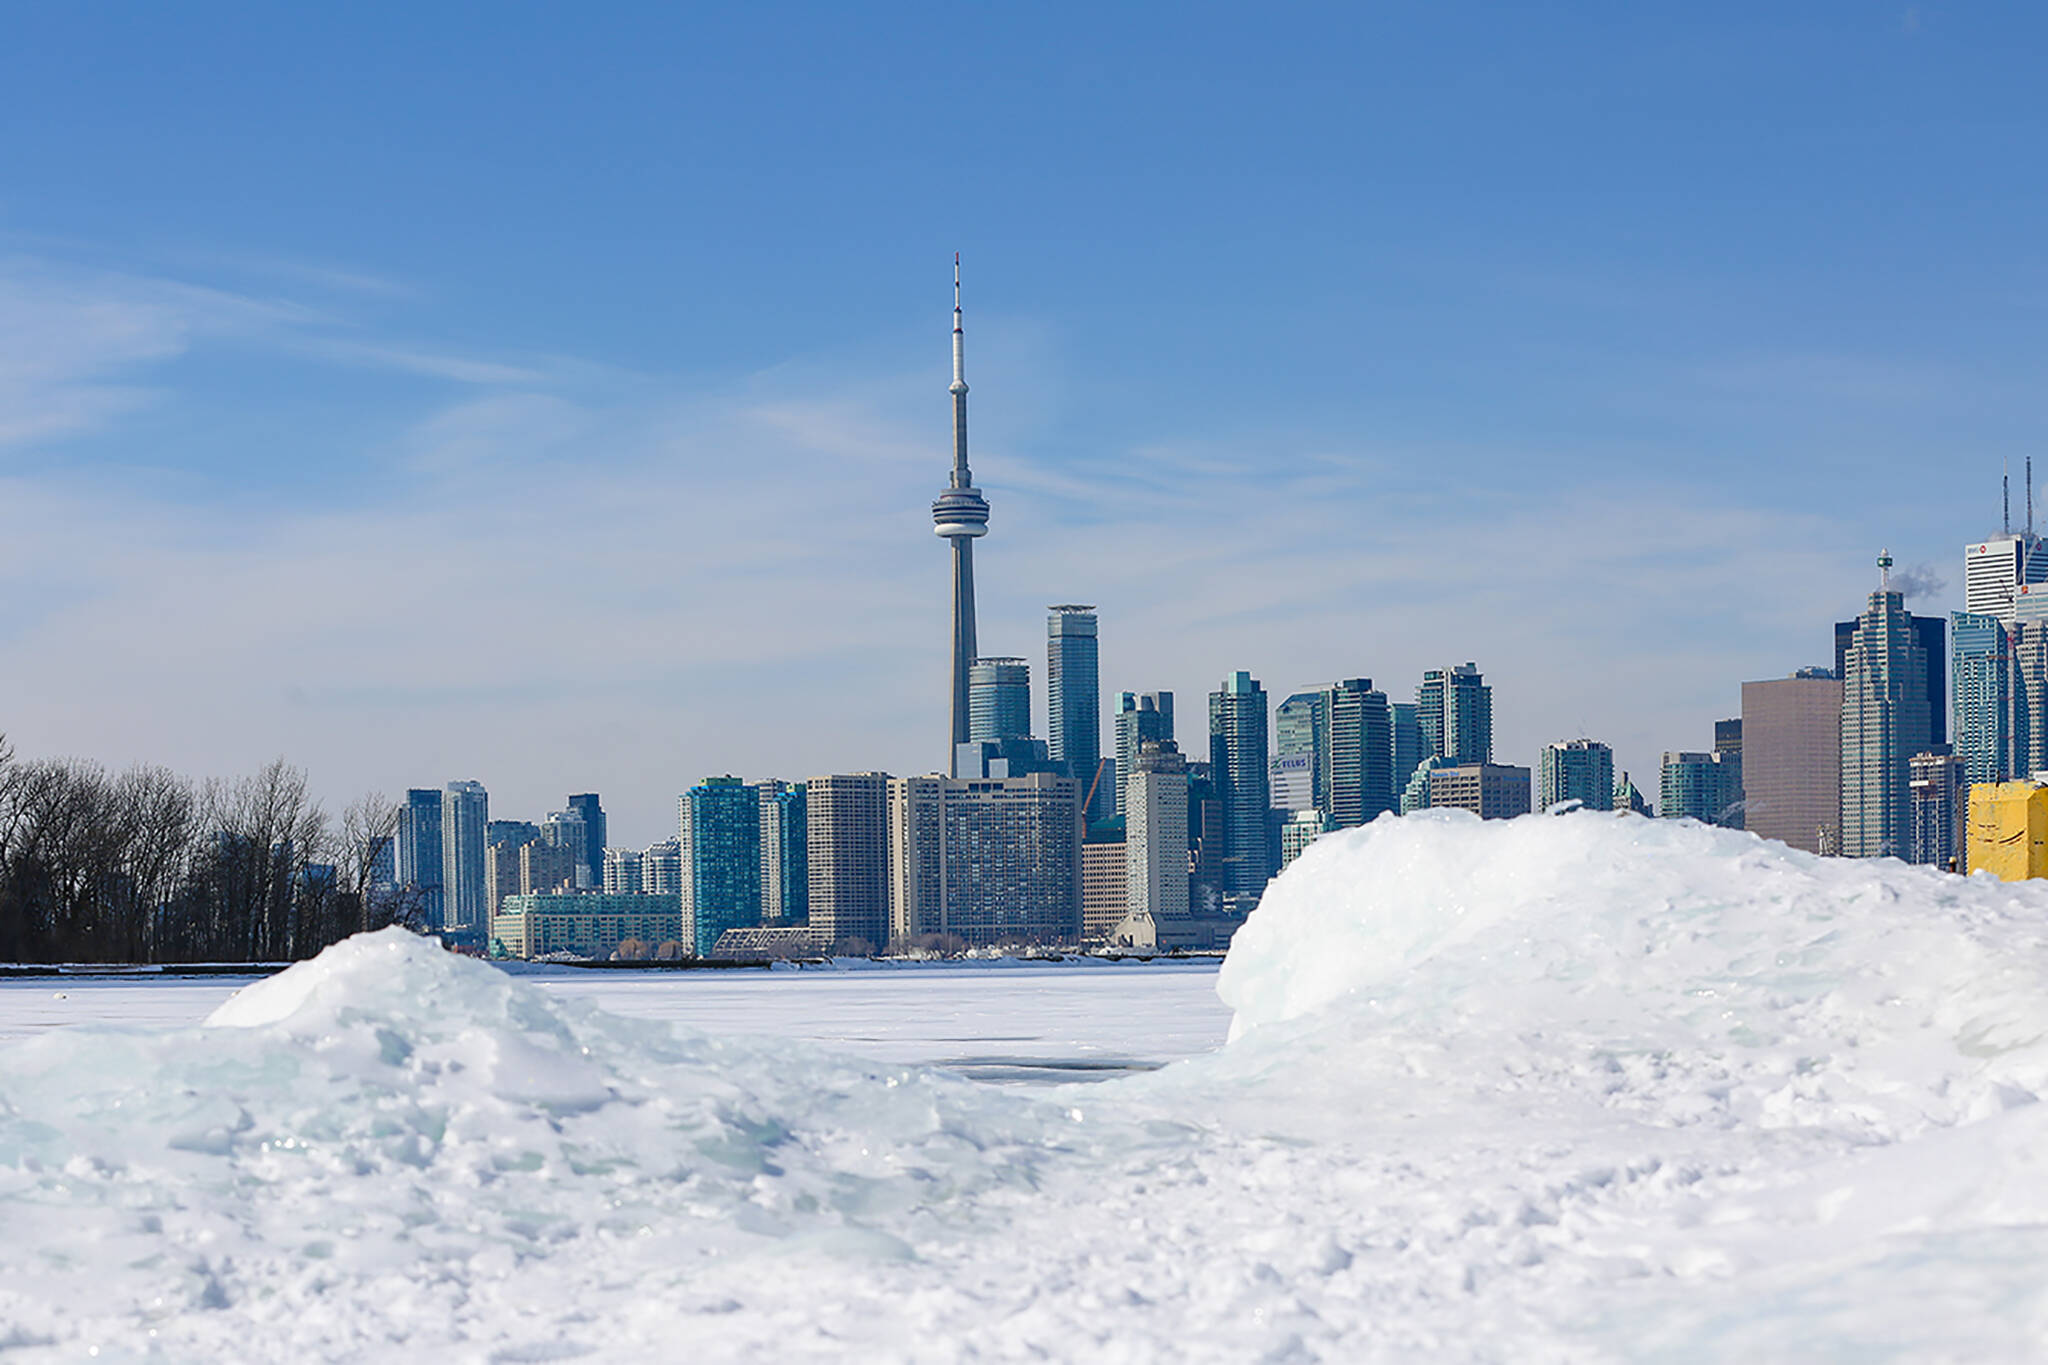 Toronto will see an abundance of snow leading up to the holidays this year